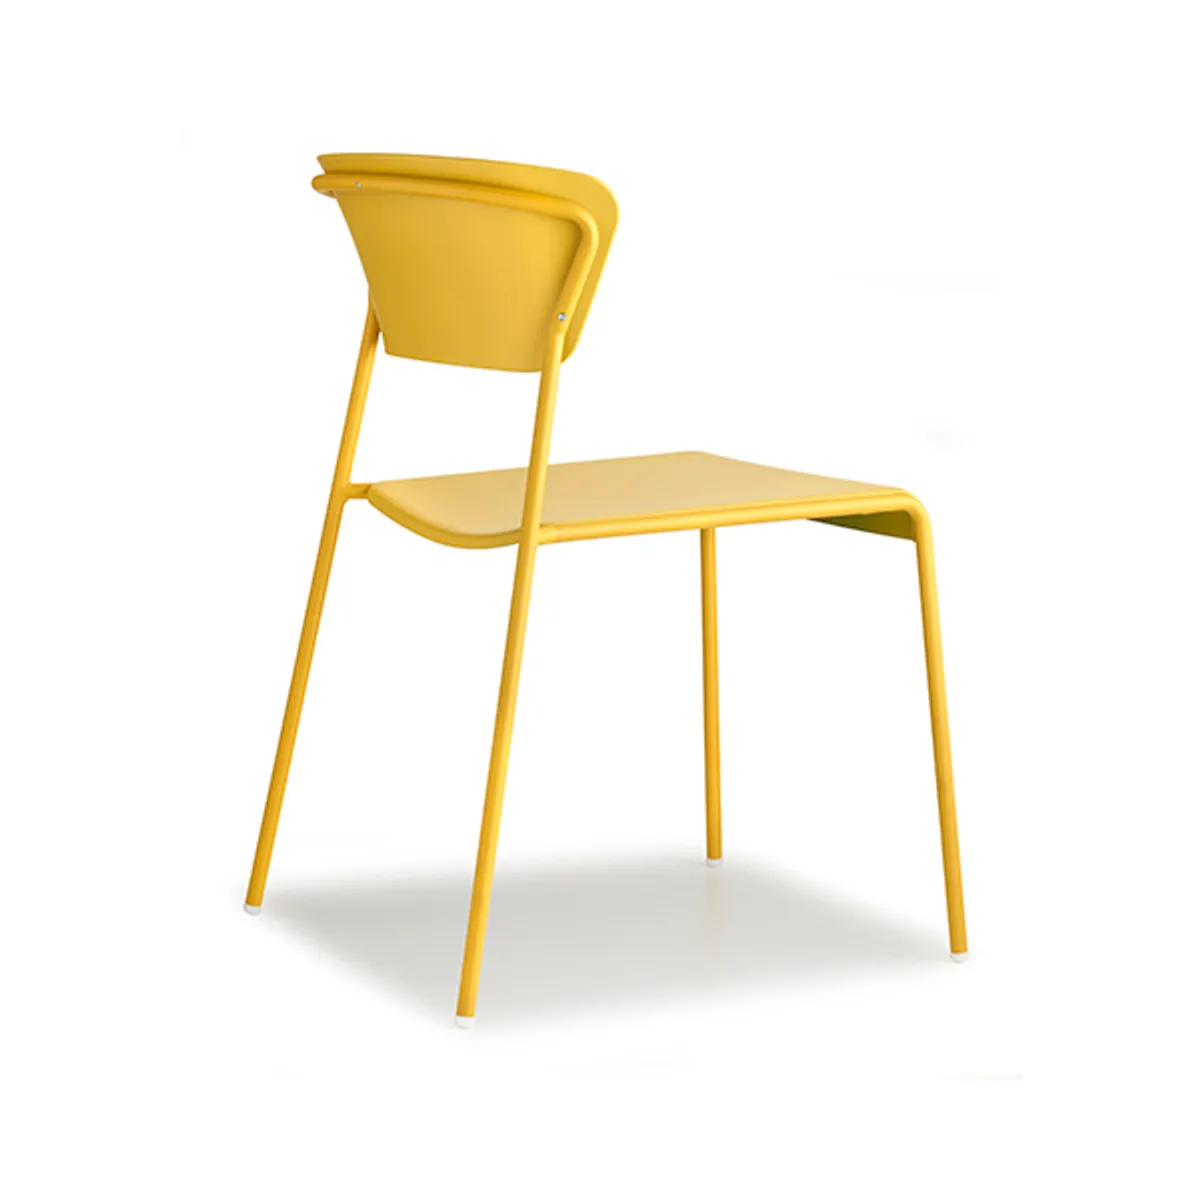 Robyn Soft Outdoor Chair Cafe Furniture Insideoutcontracts 021